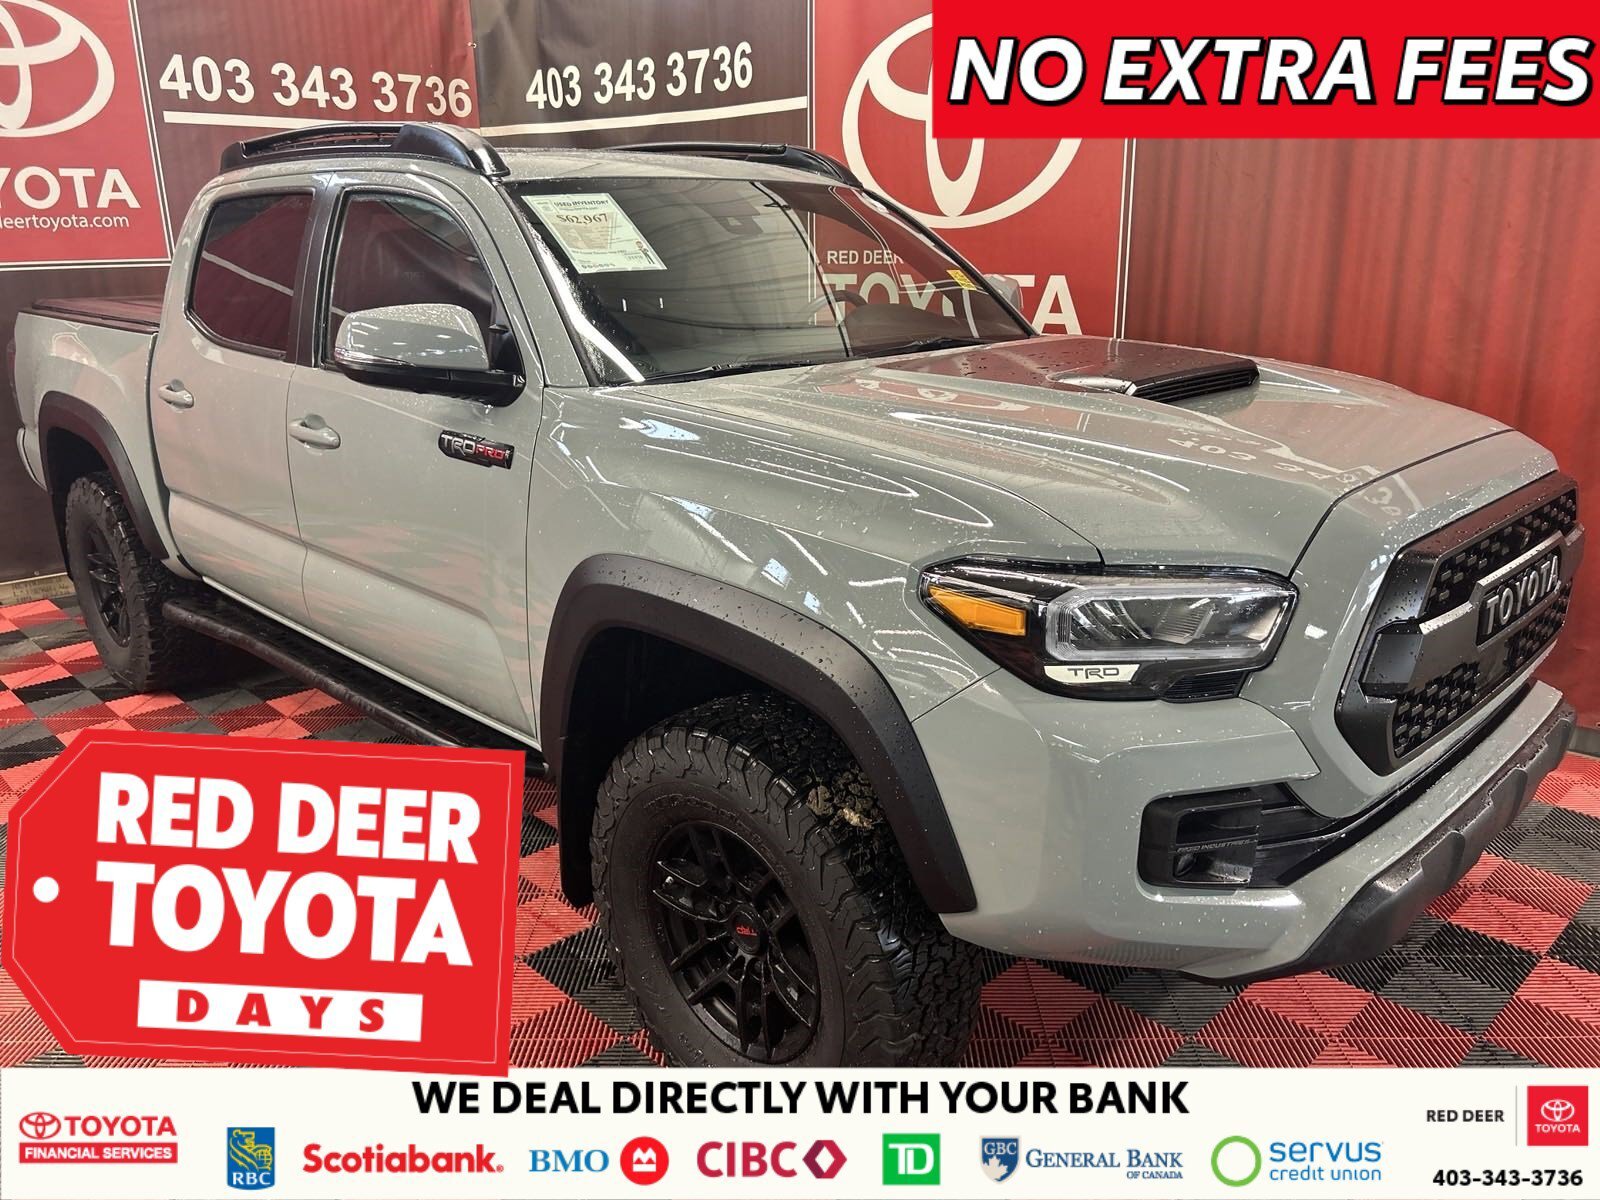 2021 Toyota Tacoma TRD Pro - Tonneau cover, Running Boards, Roof Rack